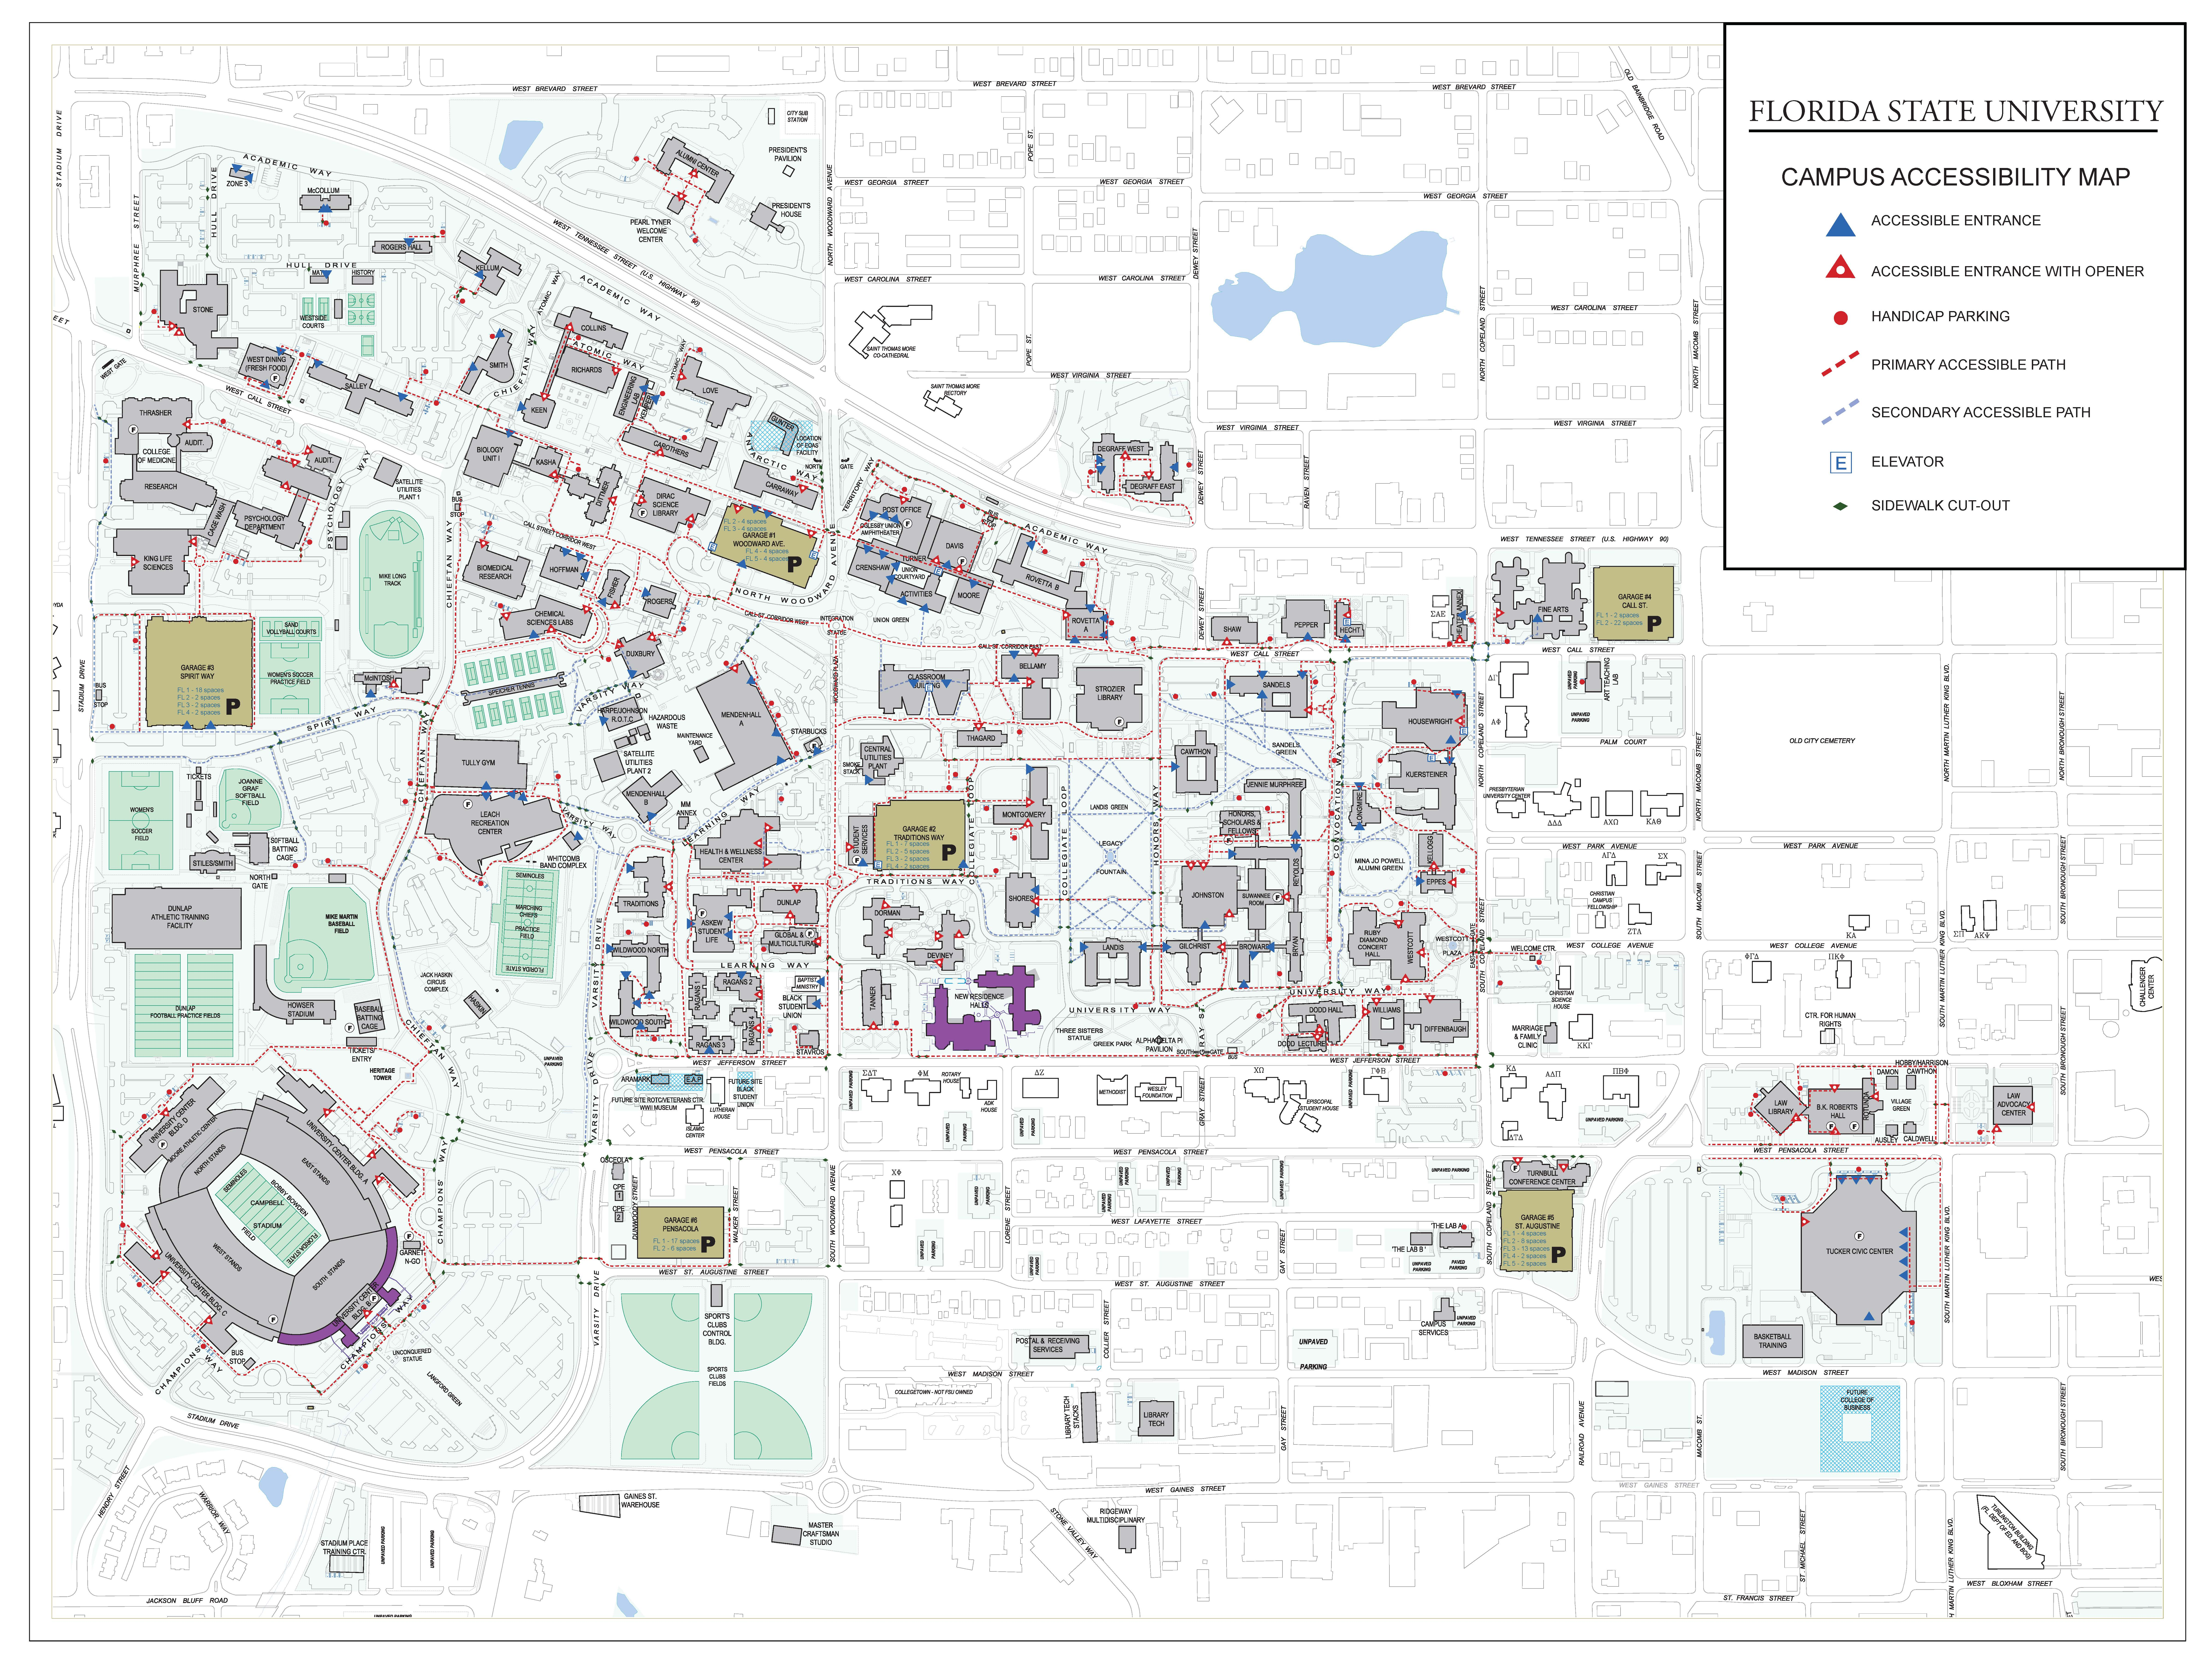 Main Campus Accessibility Map